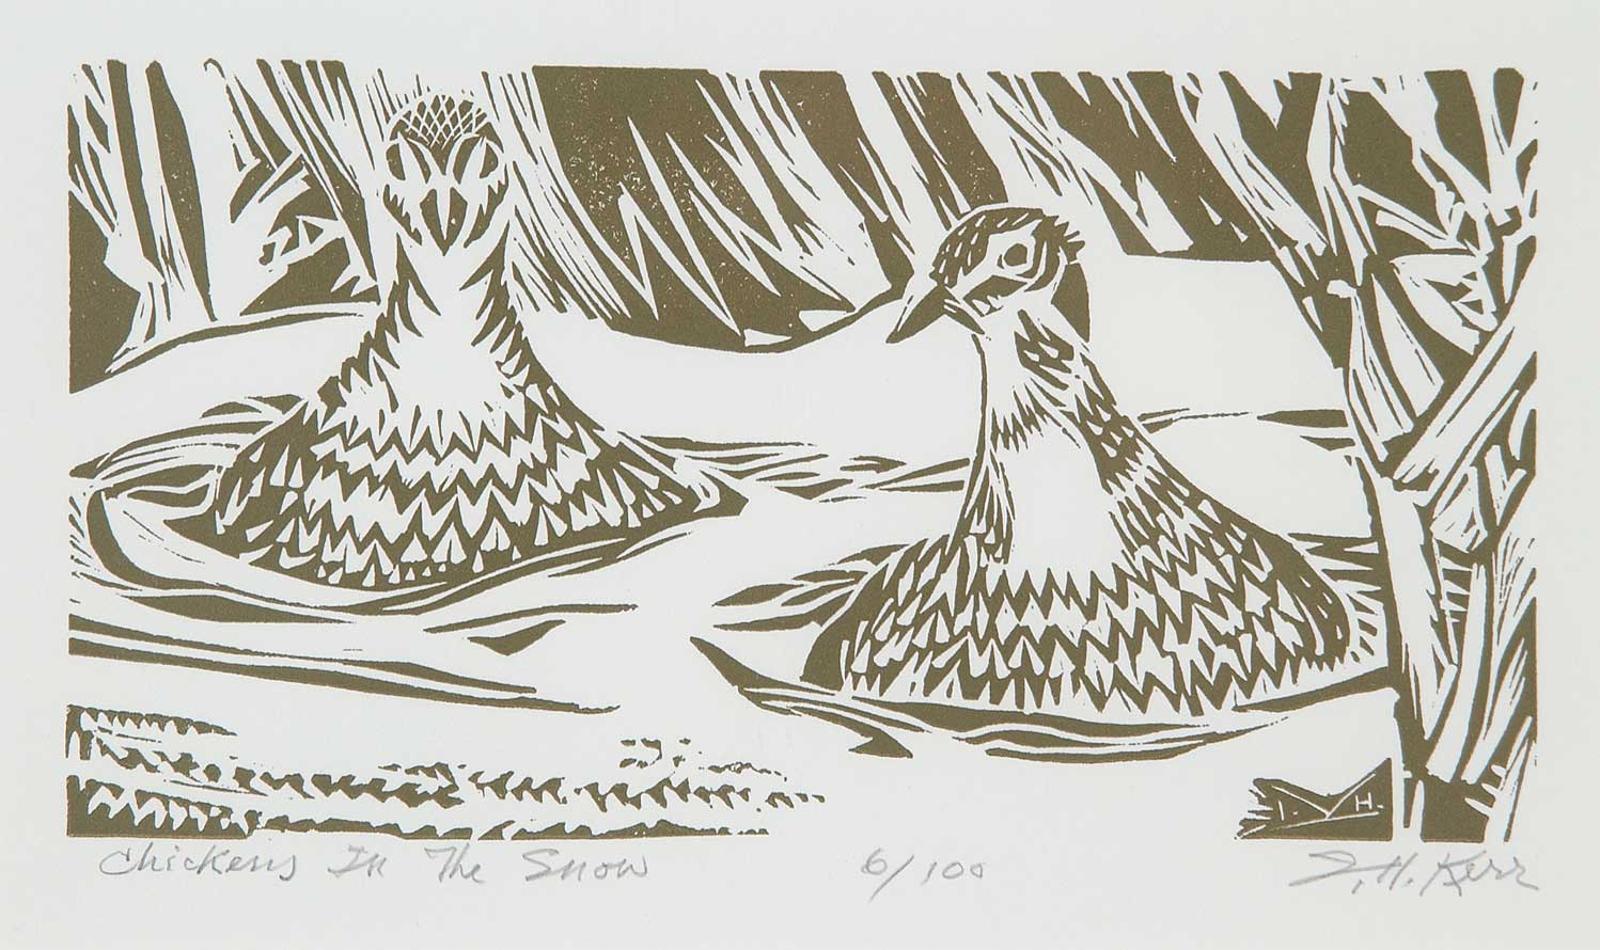 Illingworth Holey (Buck) Kerr (1905-1989) - Chickens in the Snow  #6/100